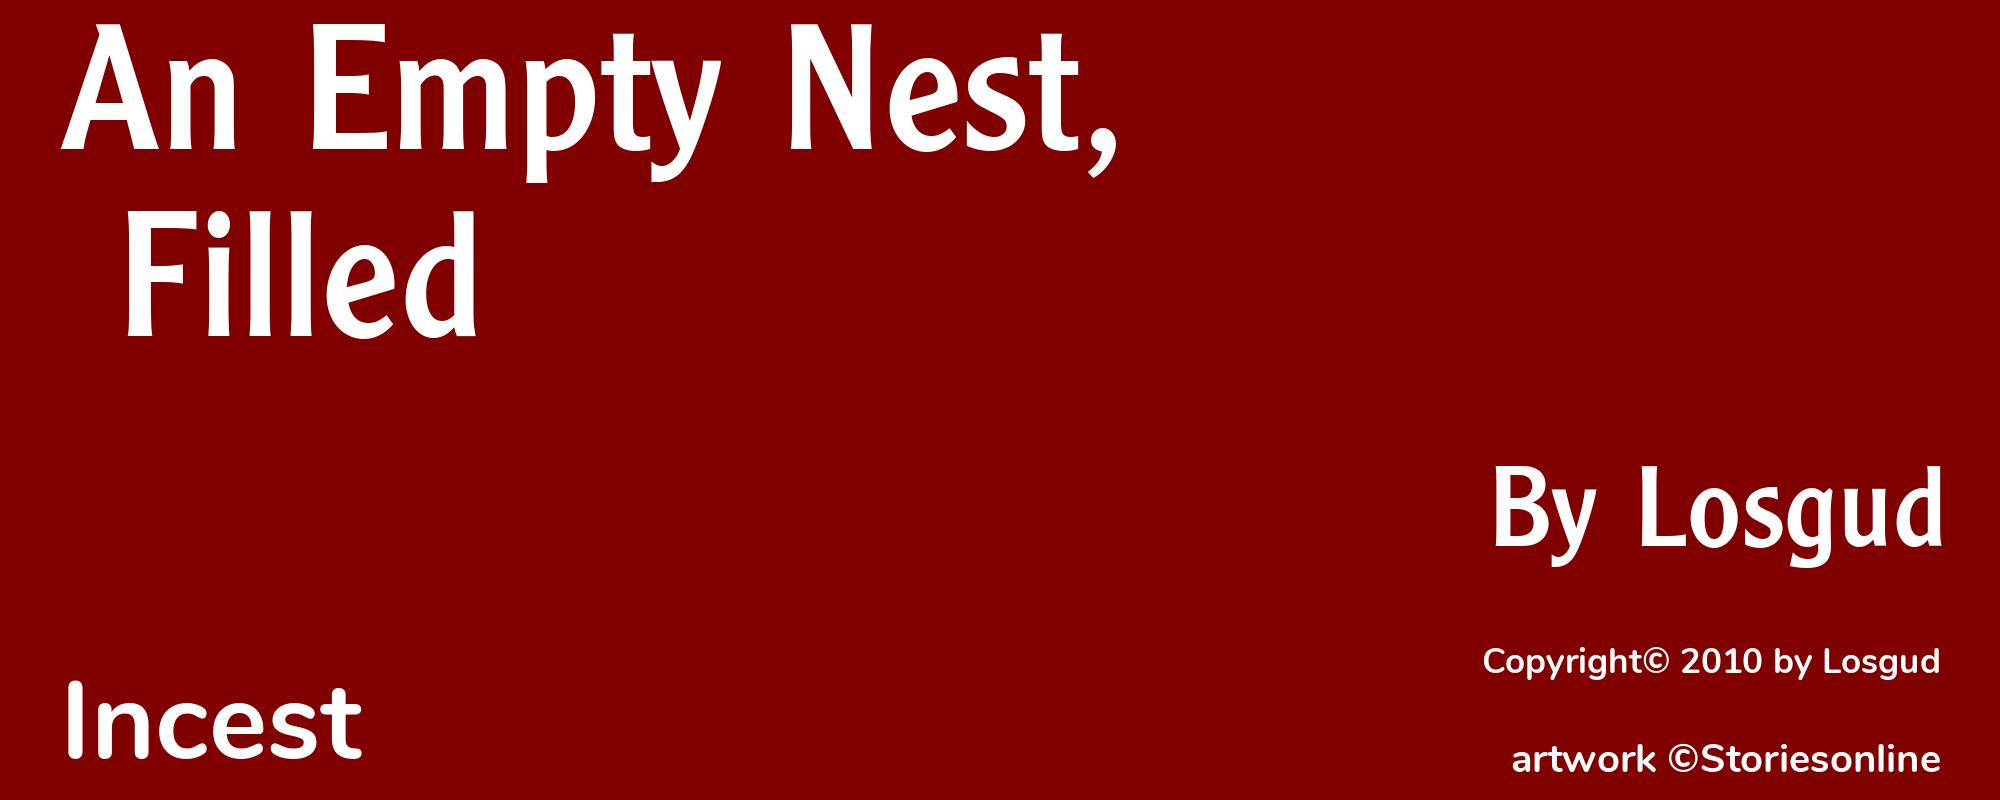 An Empty Nest, Filled - Cover